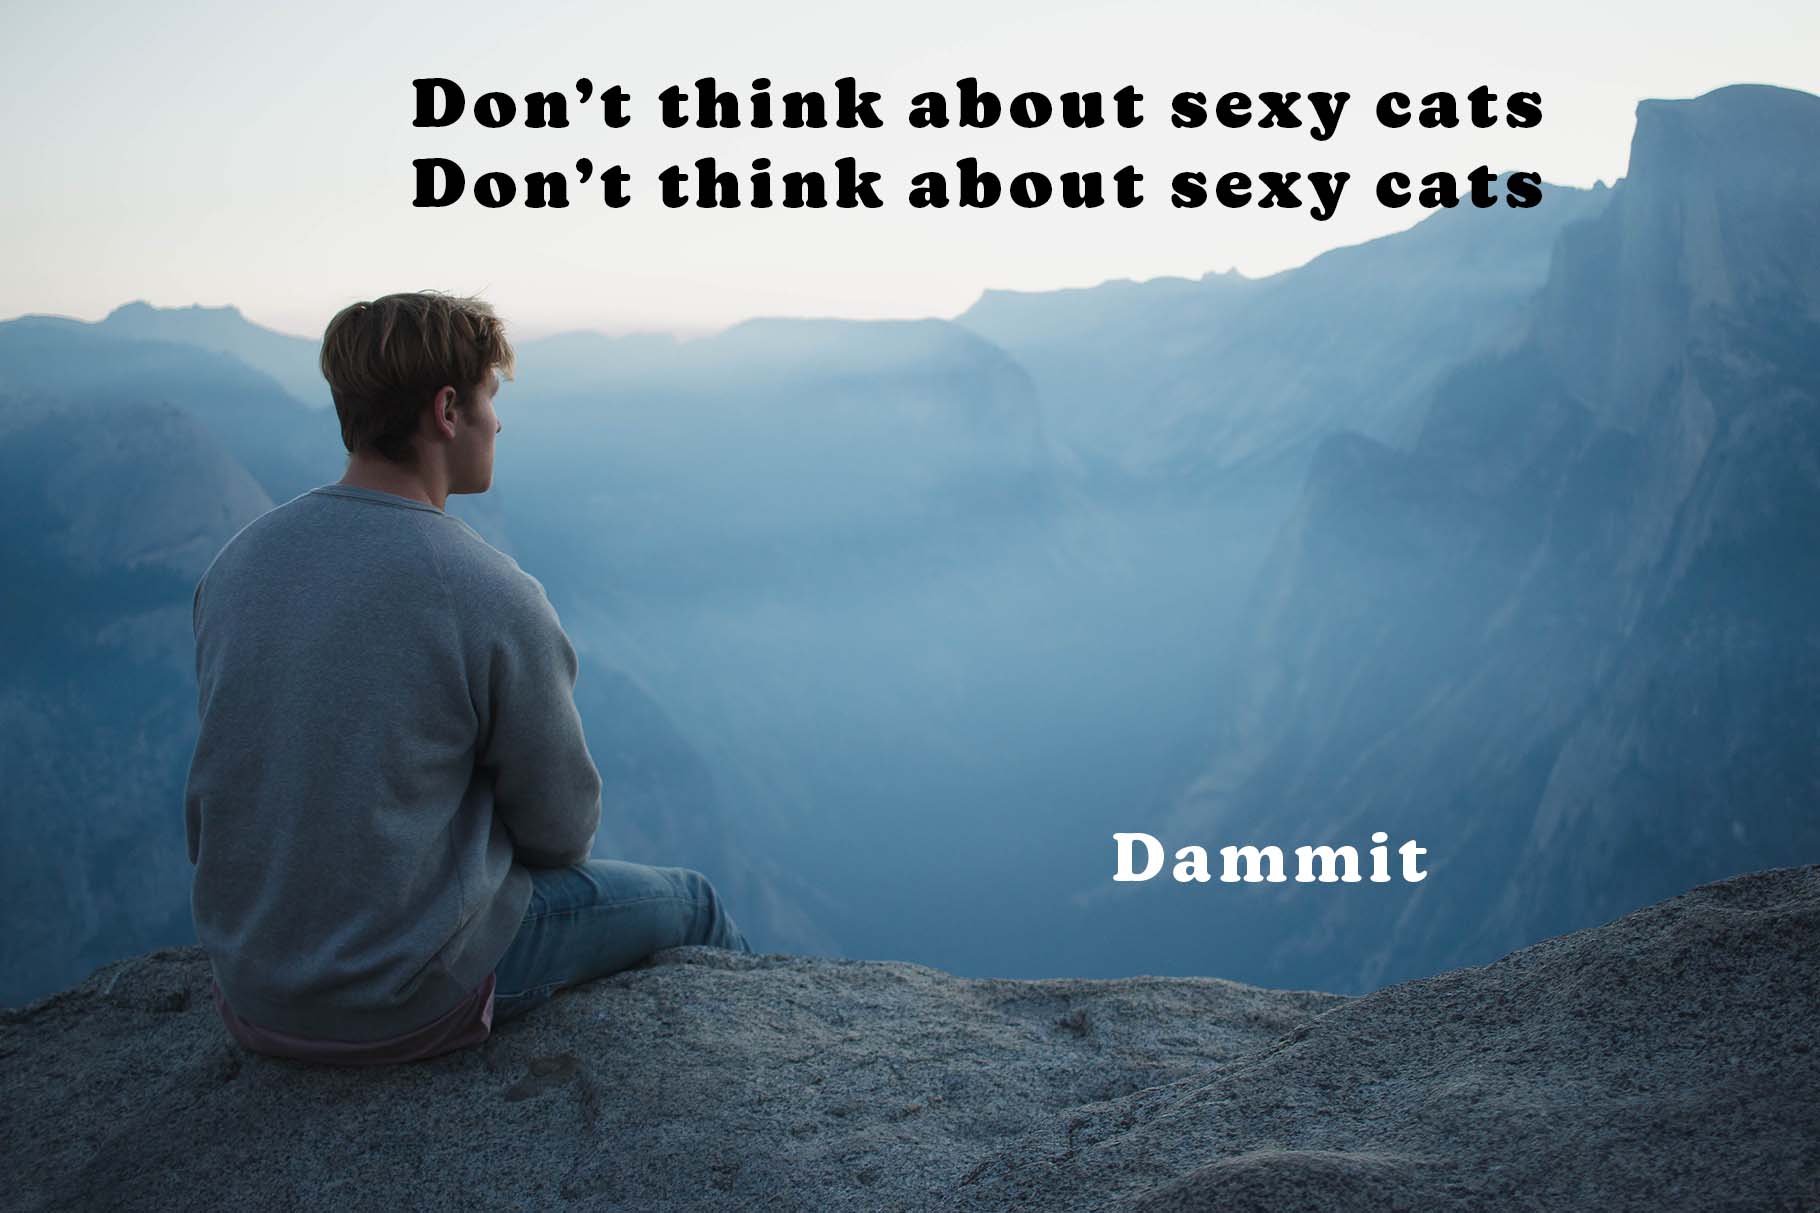 A man tries and fails to not think about sexy cats